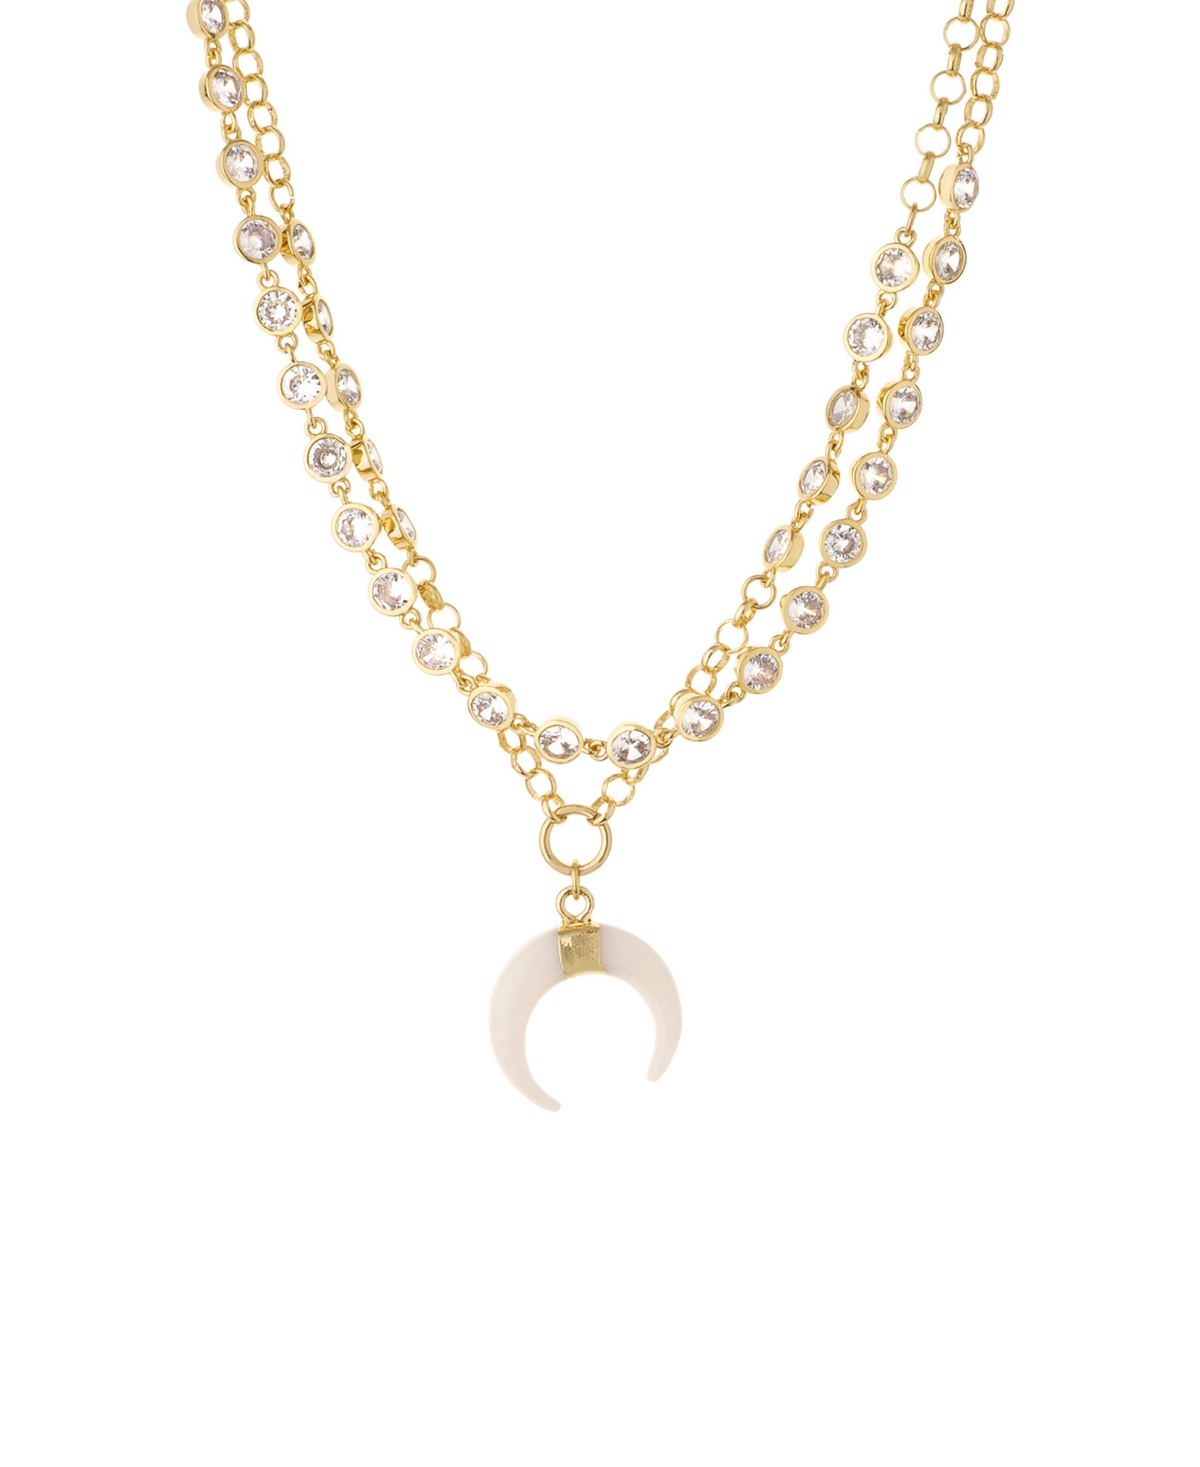 Ettika Crystal Dotted Horn Necklace In 18k Gold Plating Set, 2 Piece